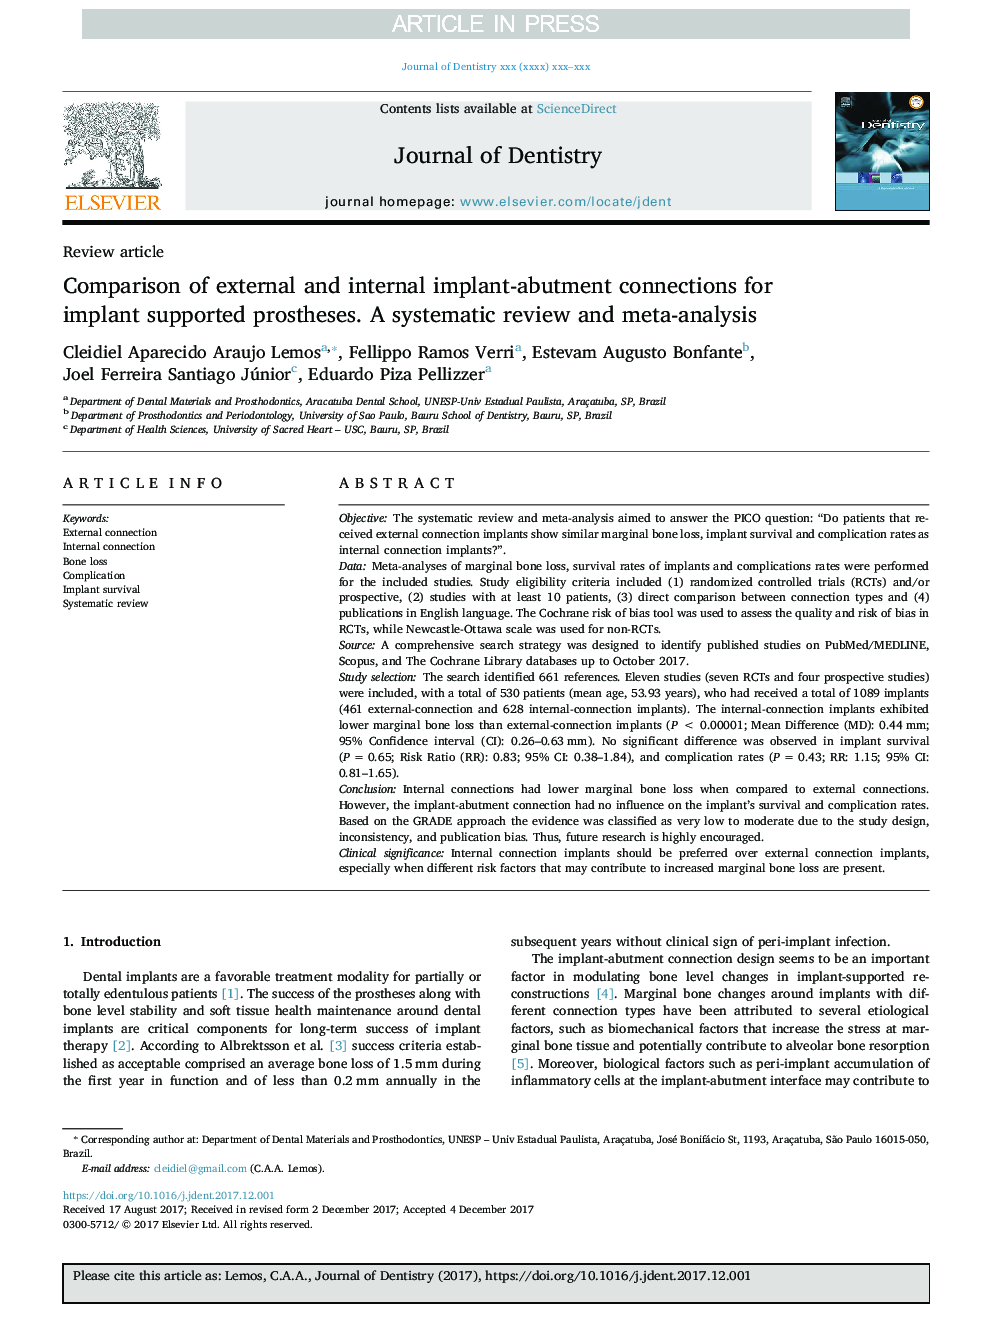 Comparison of external and internal implant-abutment connections for implant supported prostheses. A systematic review and meta-analysis